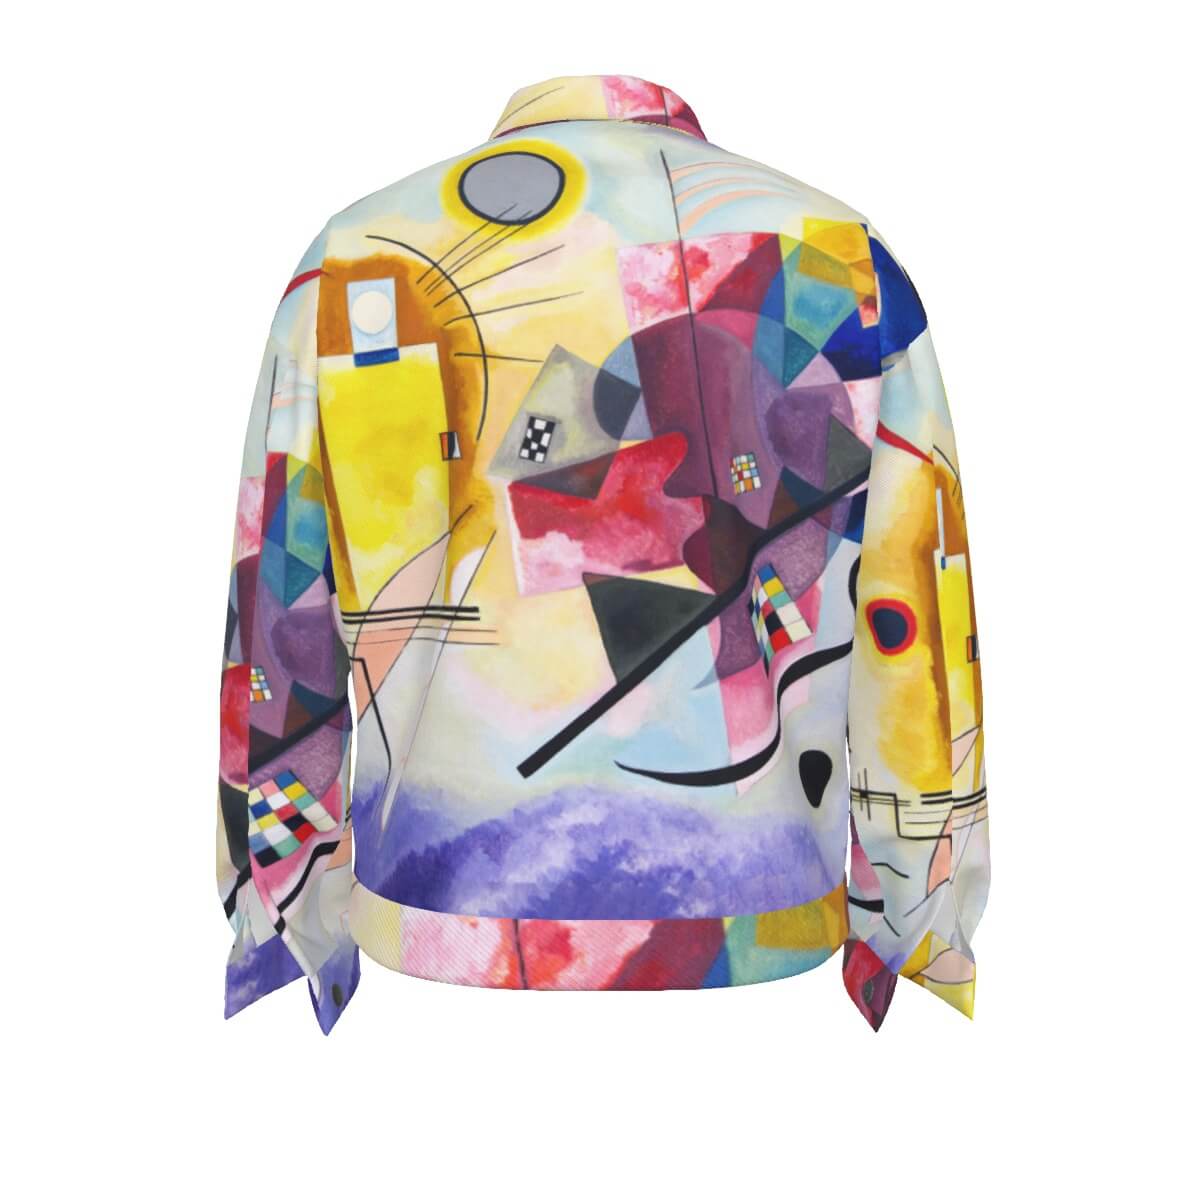 Unisex Lapel Jacket with Abstract Art Design